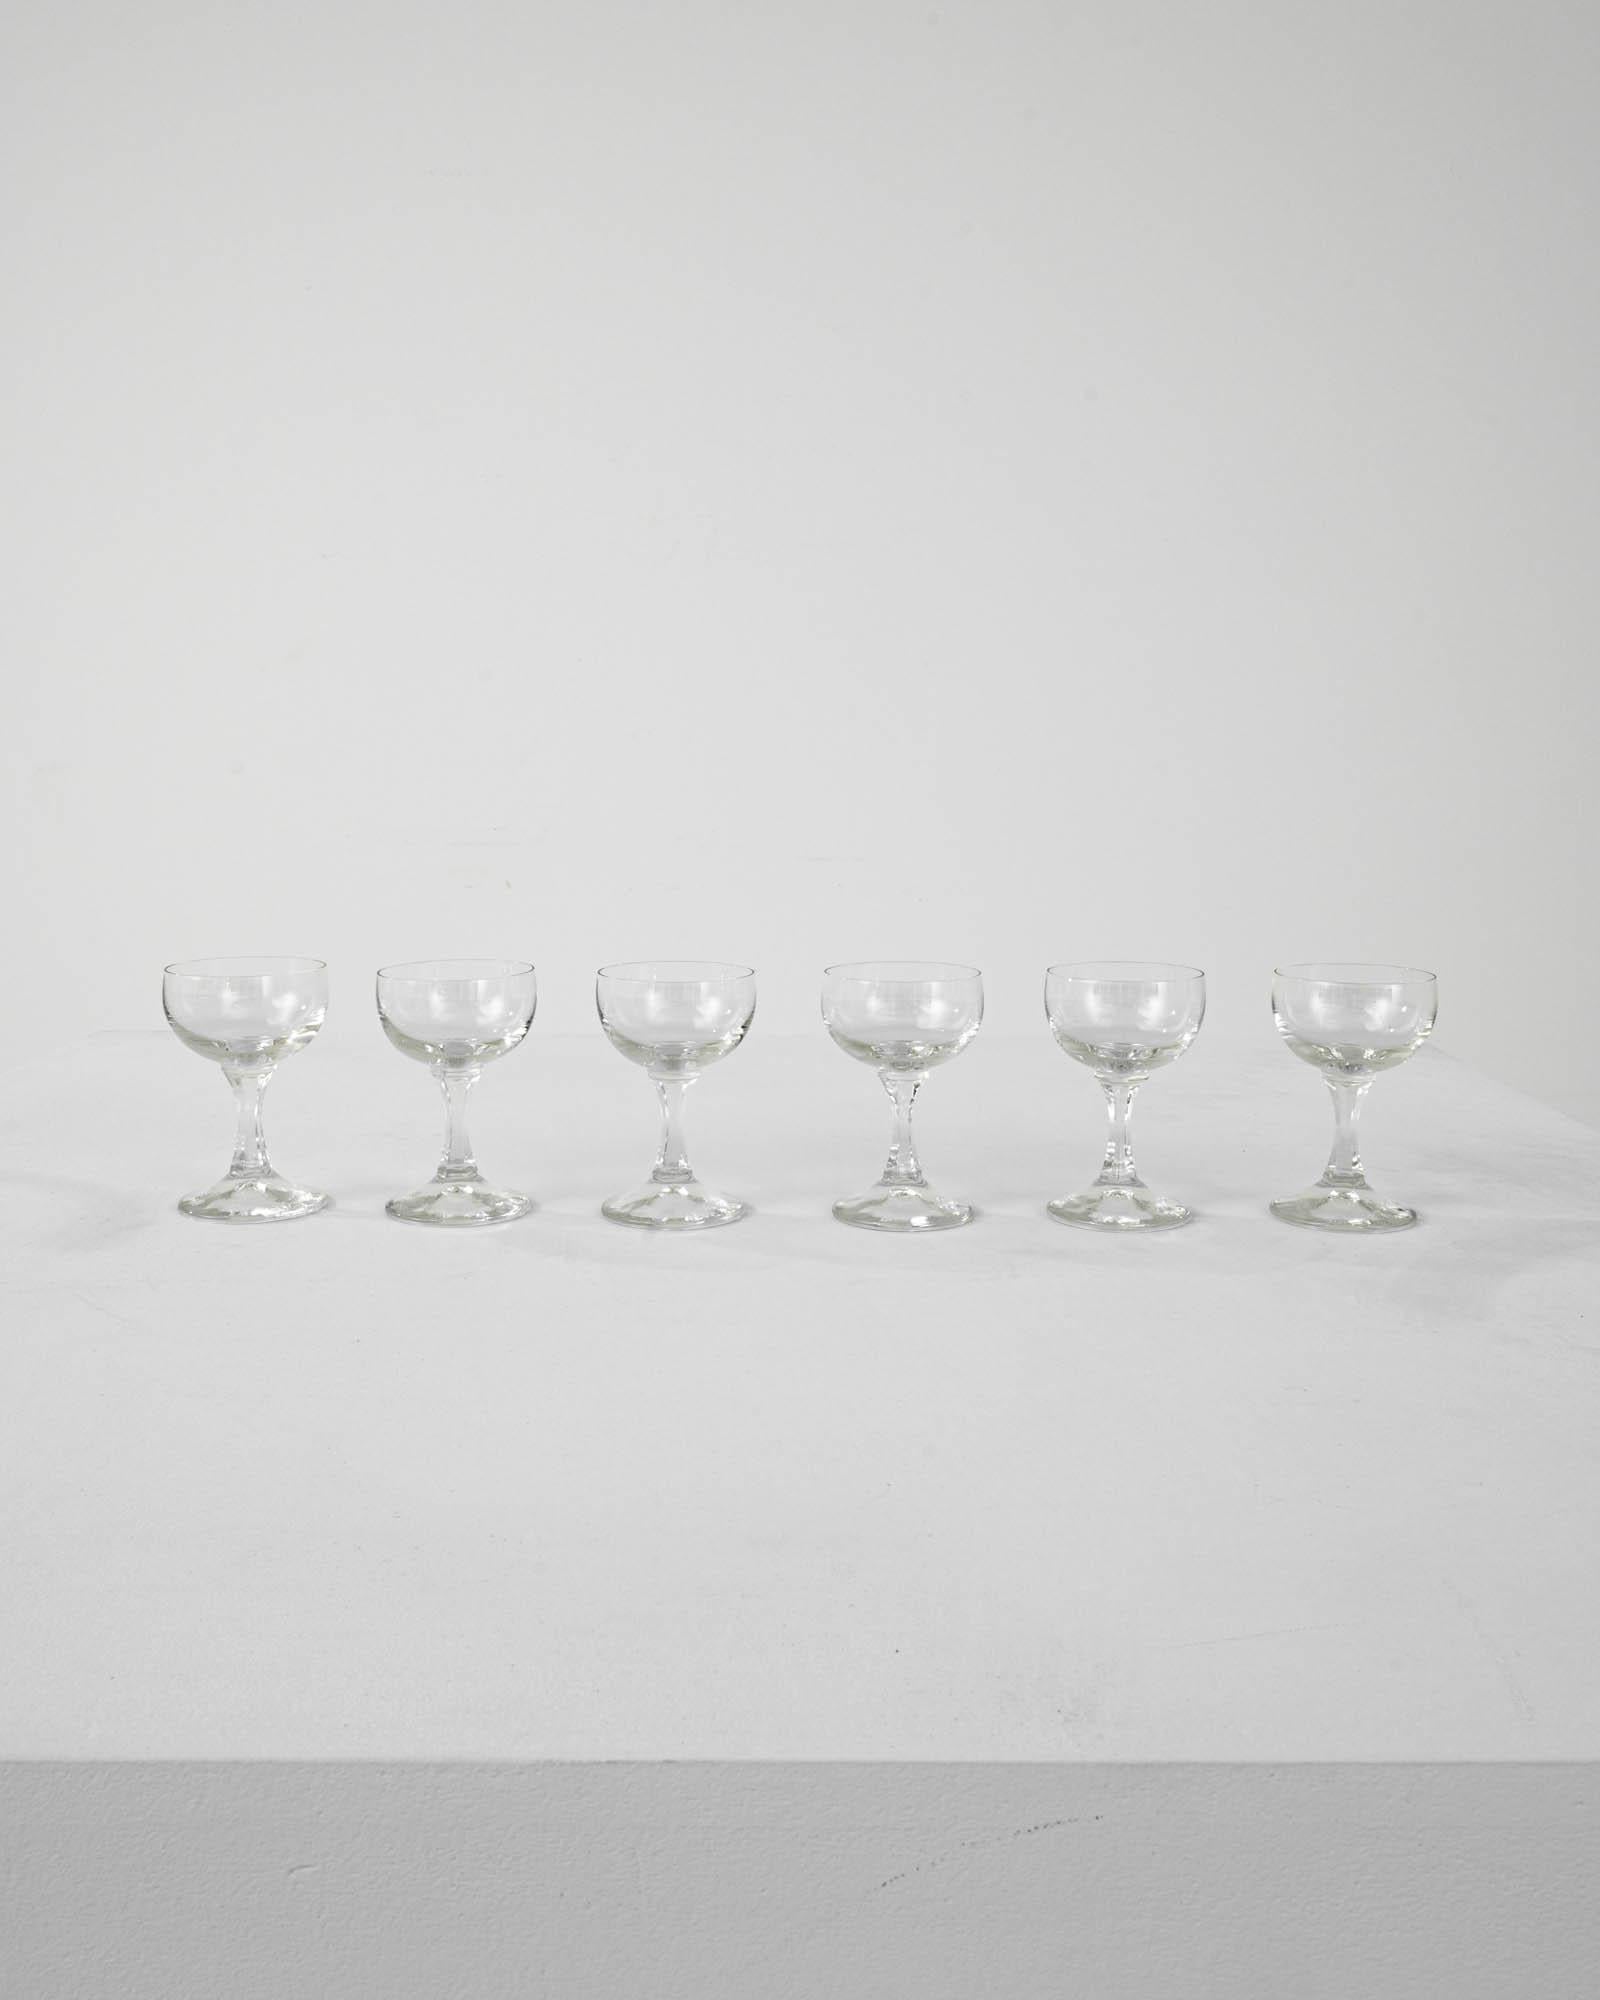 A set of vintage cut crystal glasses from France. Their petite size indicates they were intended for holding fortified wine or spirits, such as port or lillet– this French classic would typically be served as an aperitif. The elegant design rests on